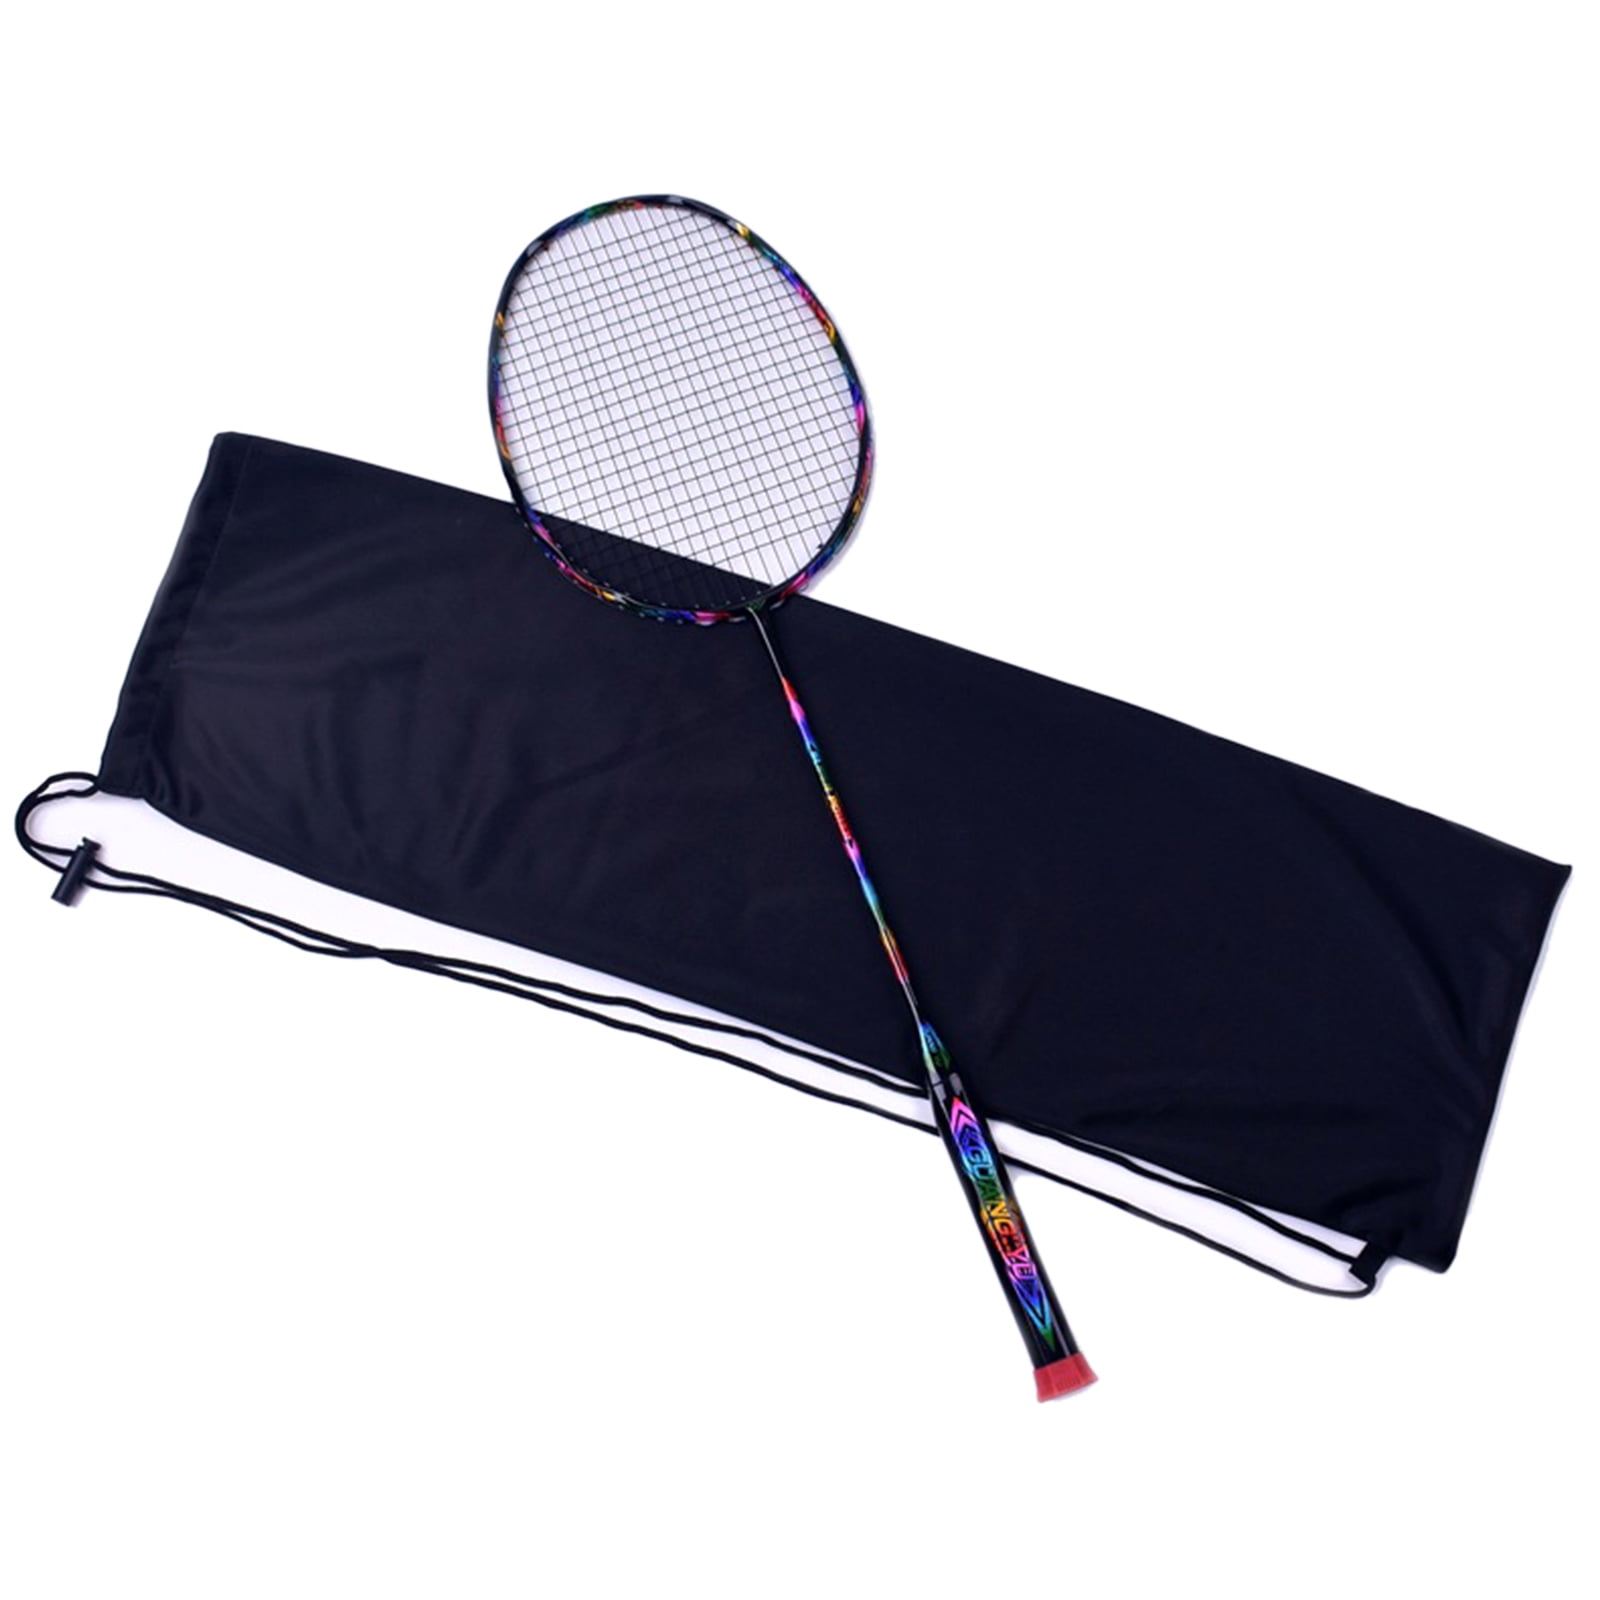 Flannel Badminton Racket Bag Sports Pouch Dust-proof 1Pc Useful New Protection 